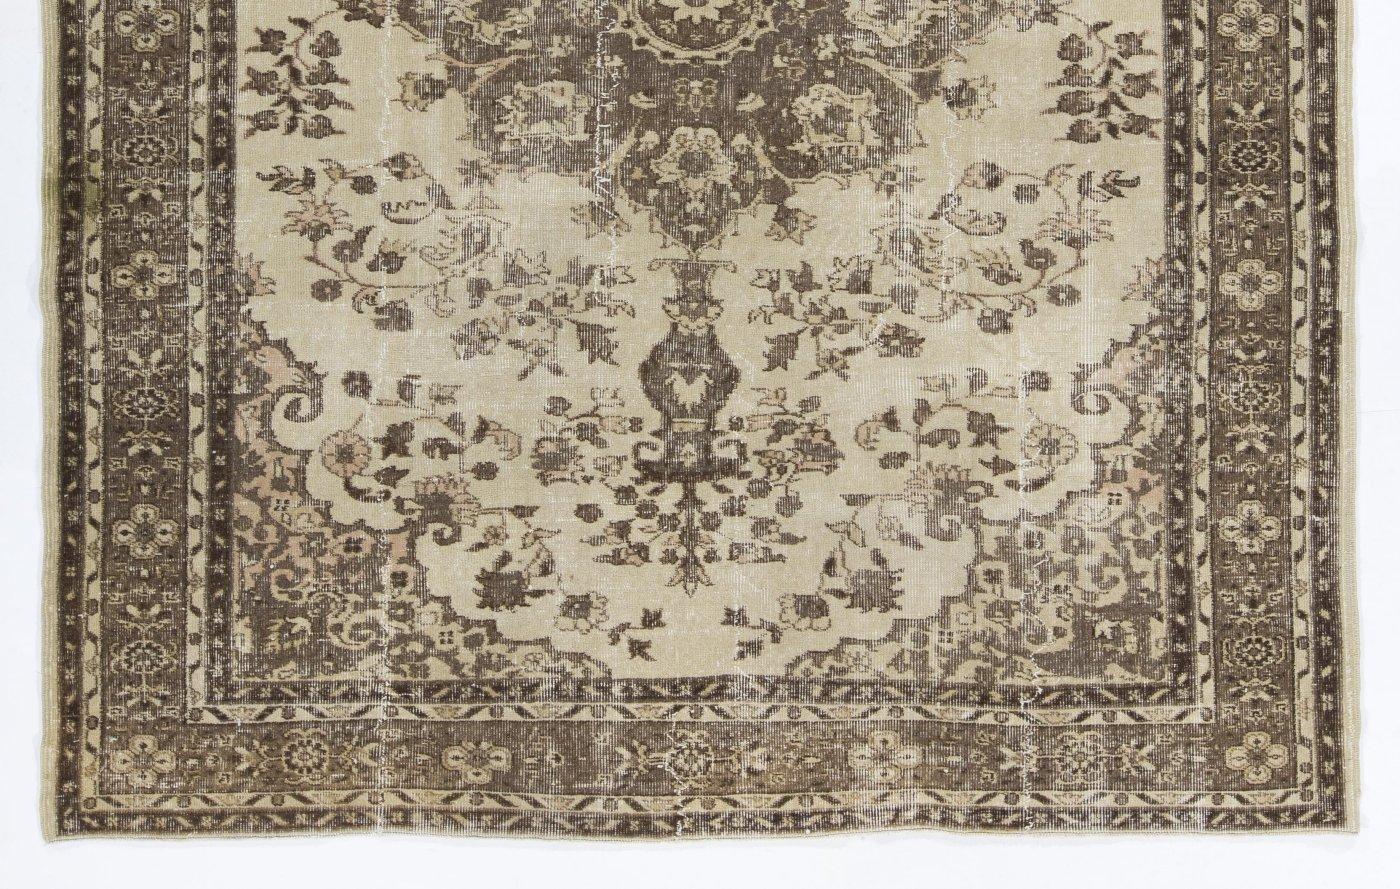 Oushak 7x9 Ft Vintage Handmade Anatolian Area Rug in Beige. Great for Office and Home For Sale